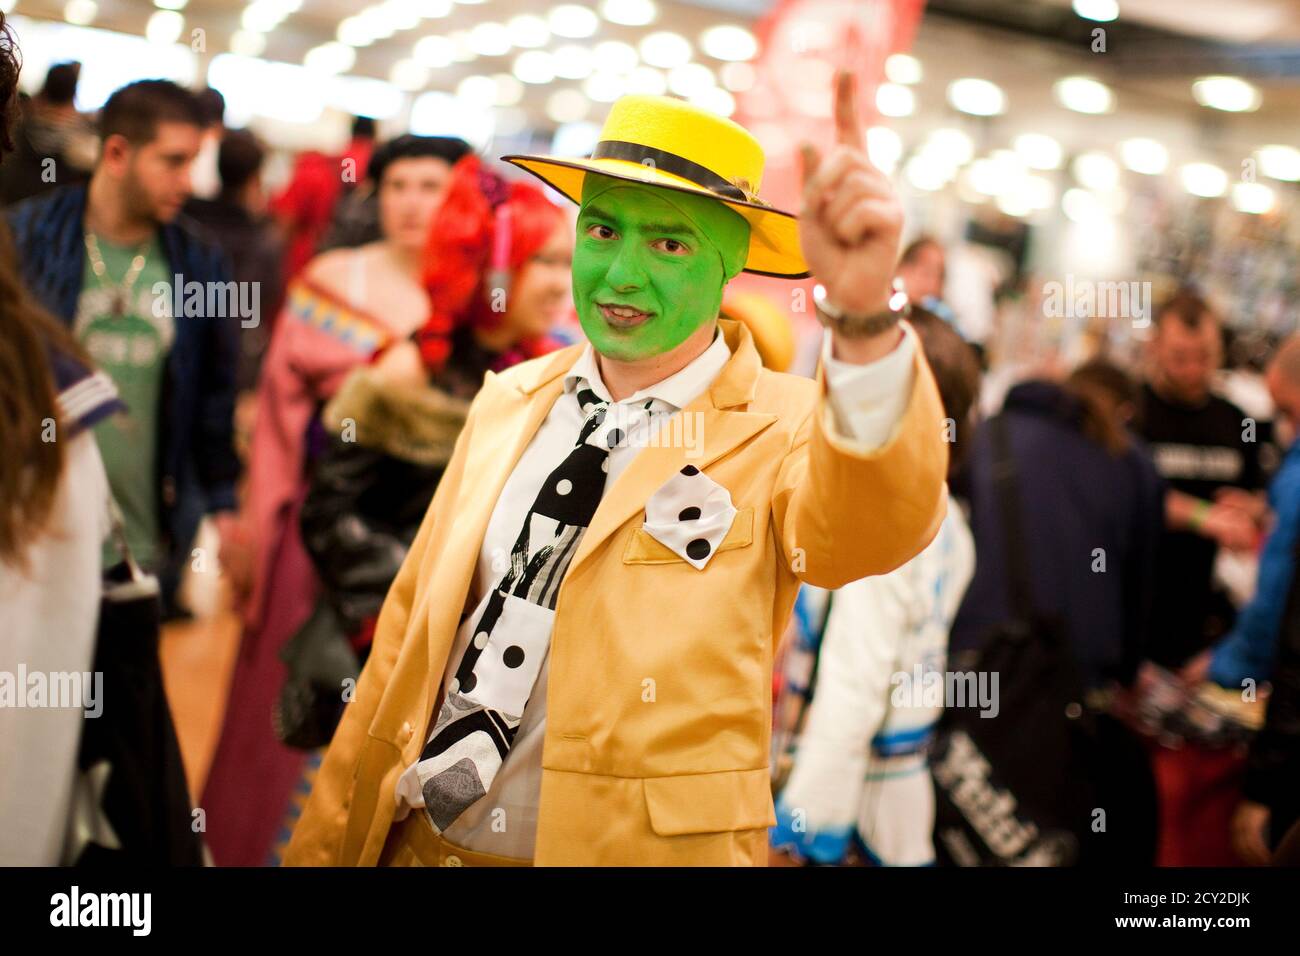 A cosplay enthusiast wearing the costume of the movie character "The Mask"  reacts at the Polymanga show in Lausanne, April 7, 2012. Polymanga is the  largest manga, anime, video games and pop